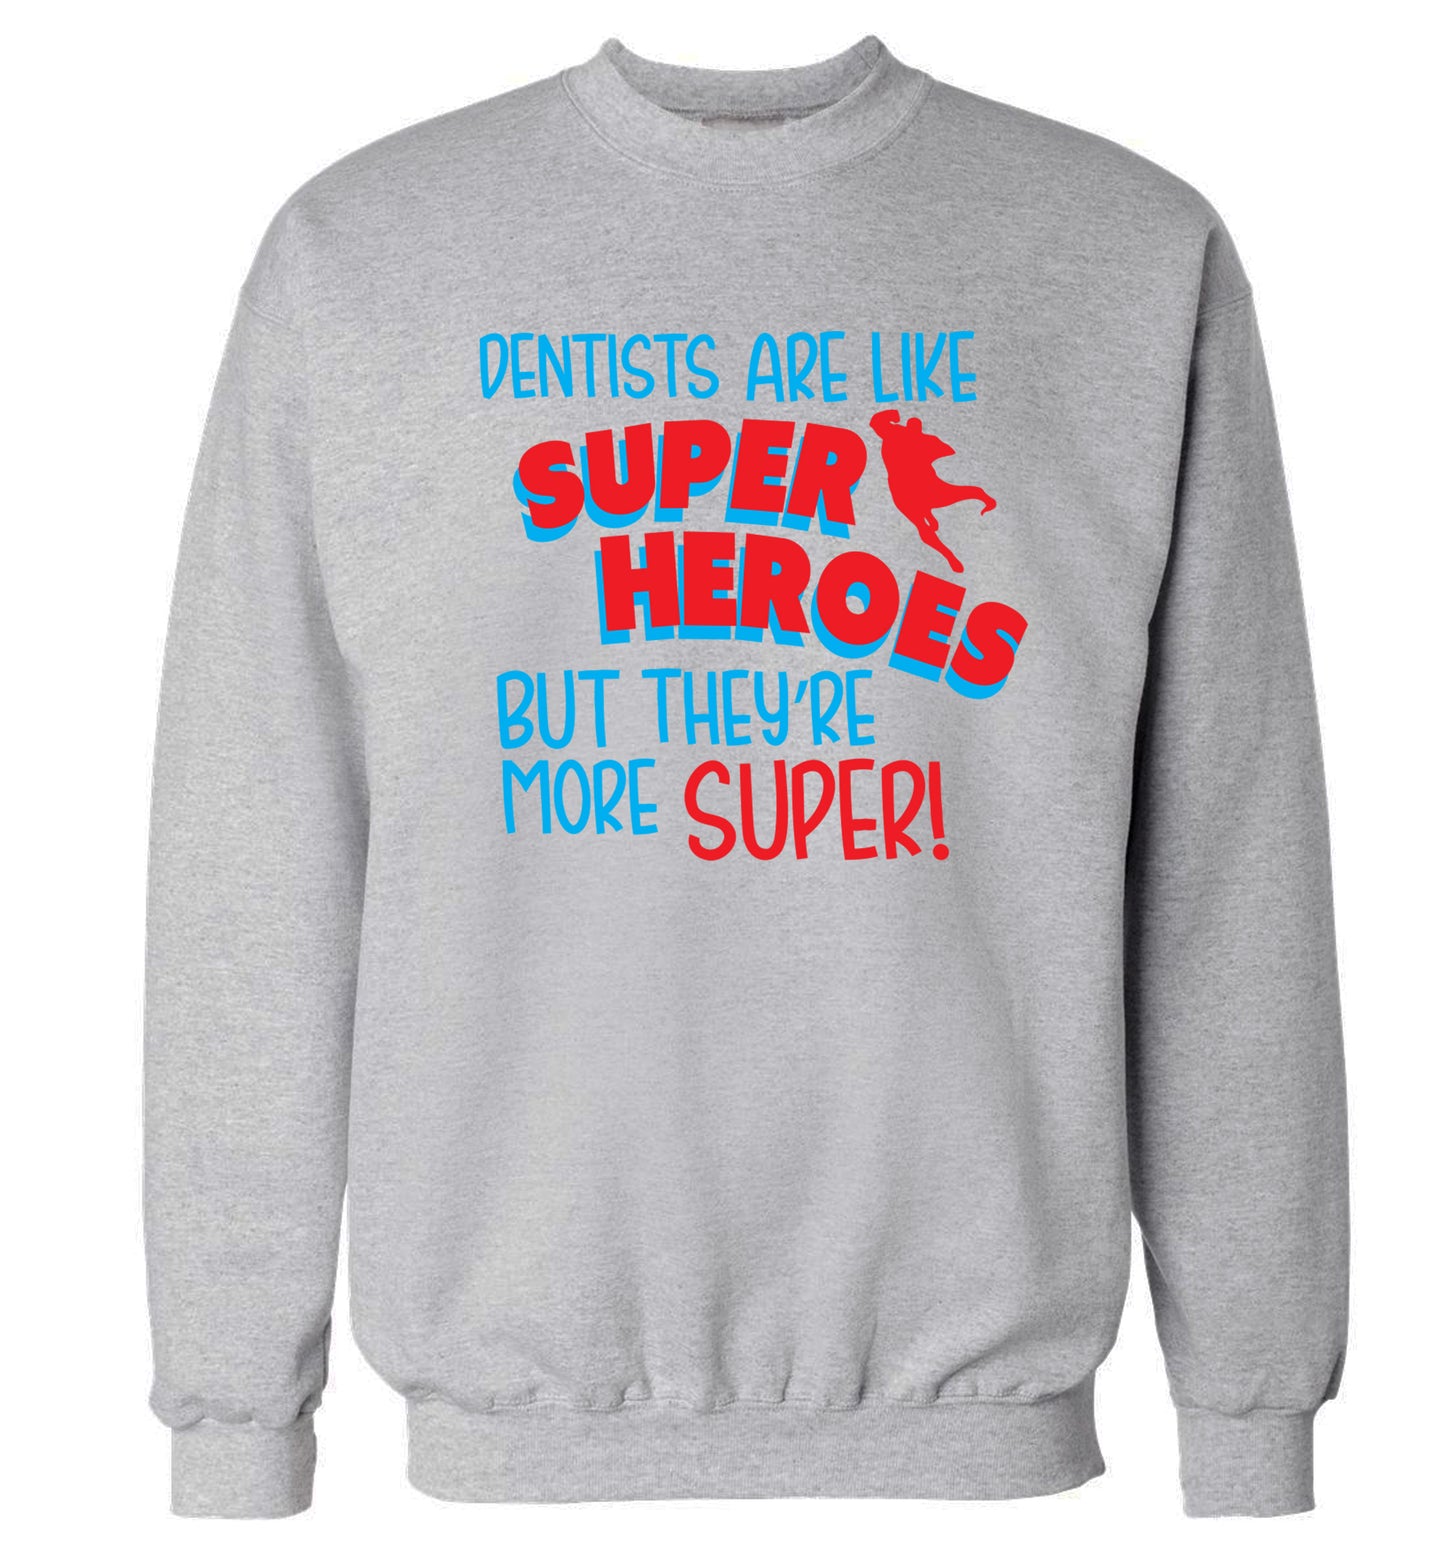 Dentists are like superheros but they're more super Adult's unisex grey Sweater 2XL